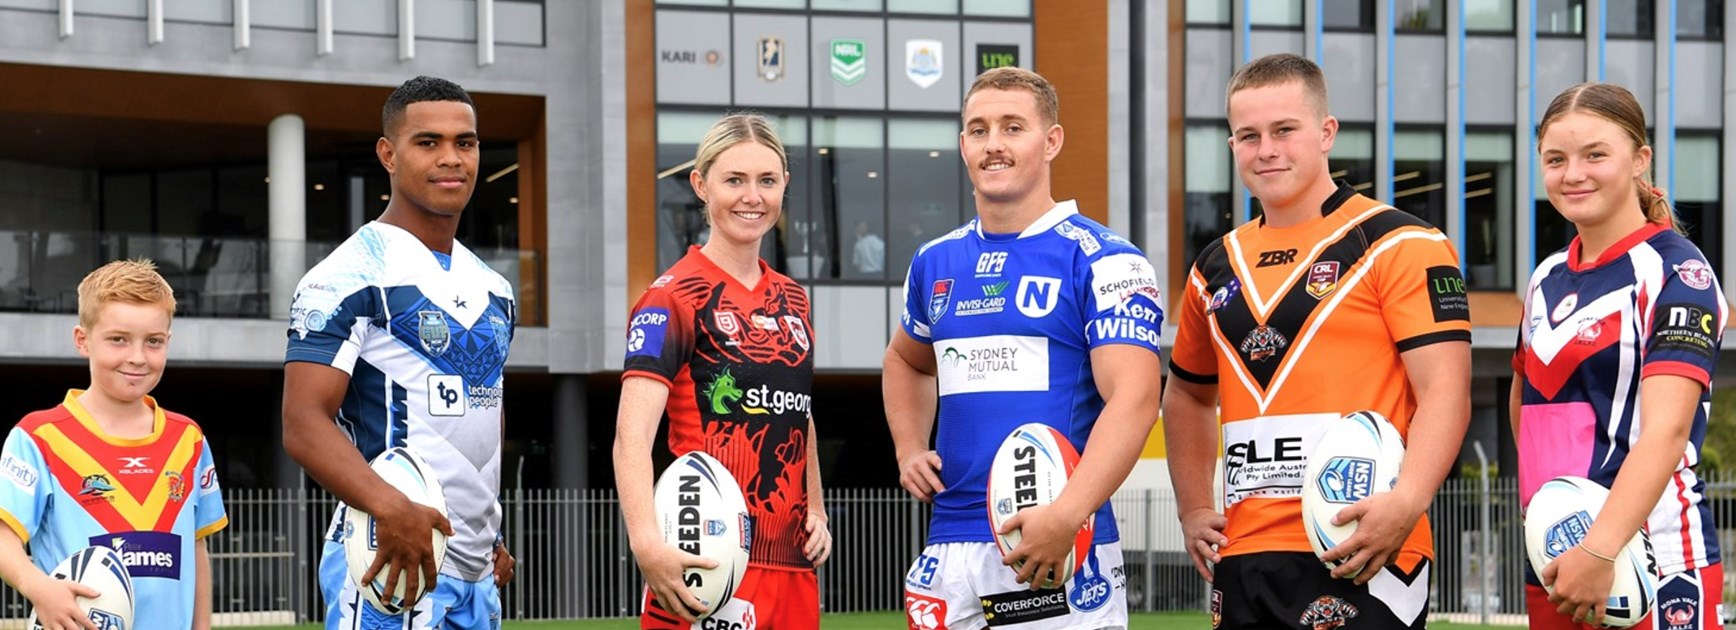 Grassroots Rugby League set to re-start in NSW in July